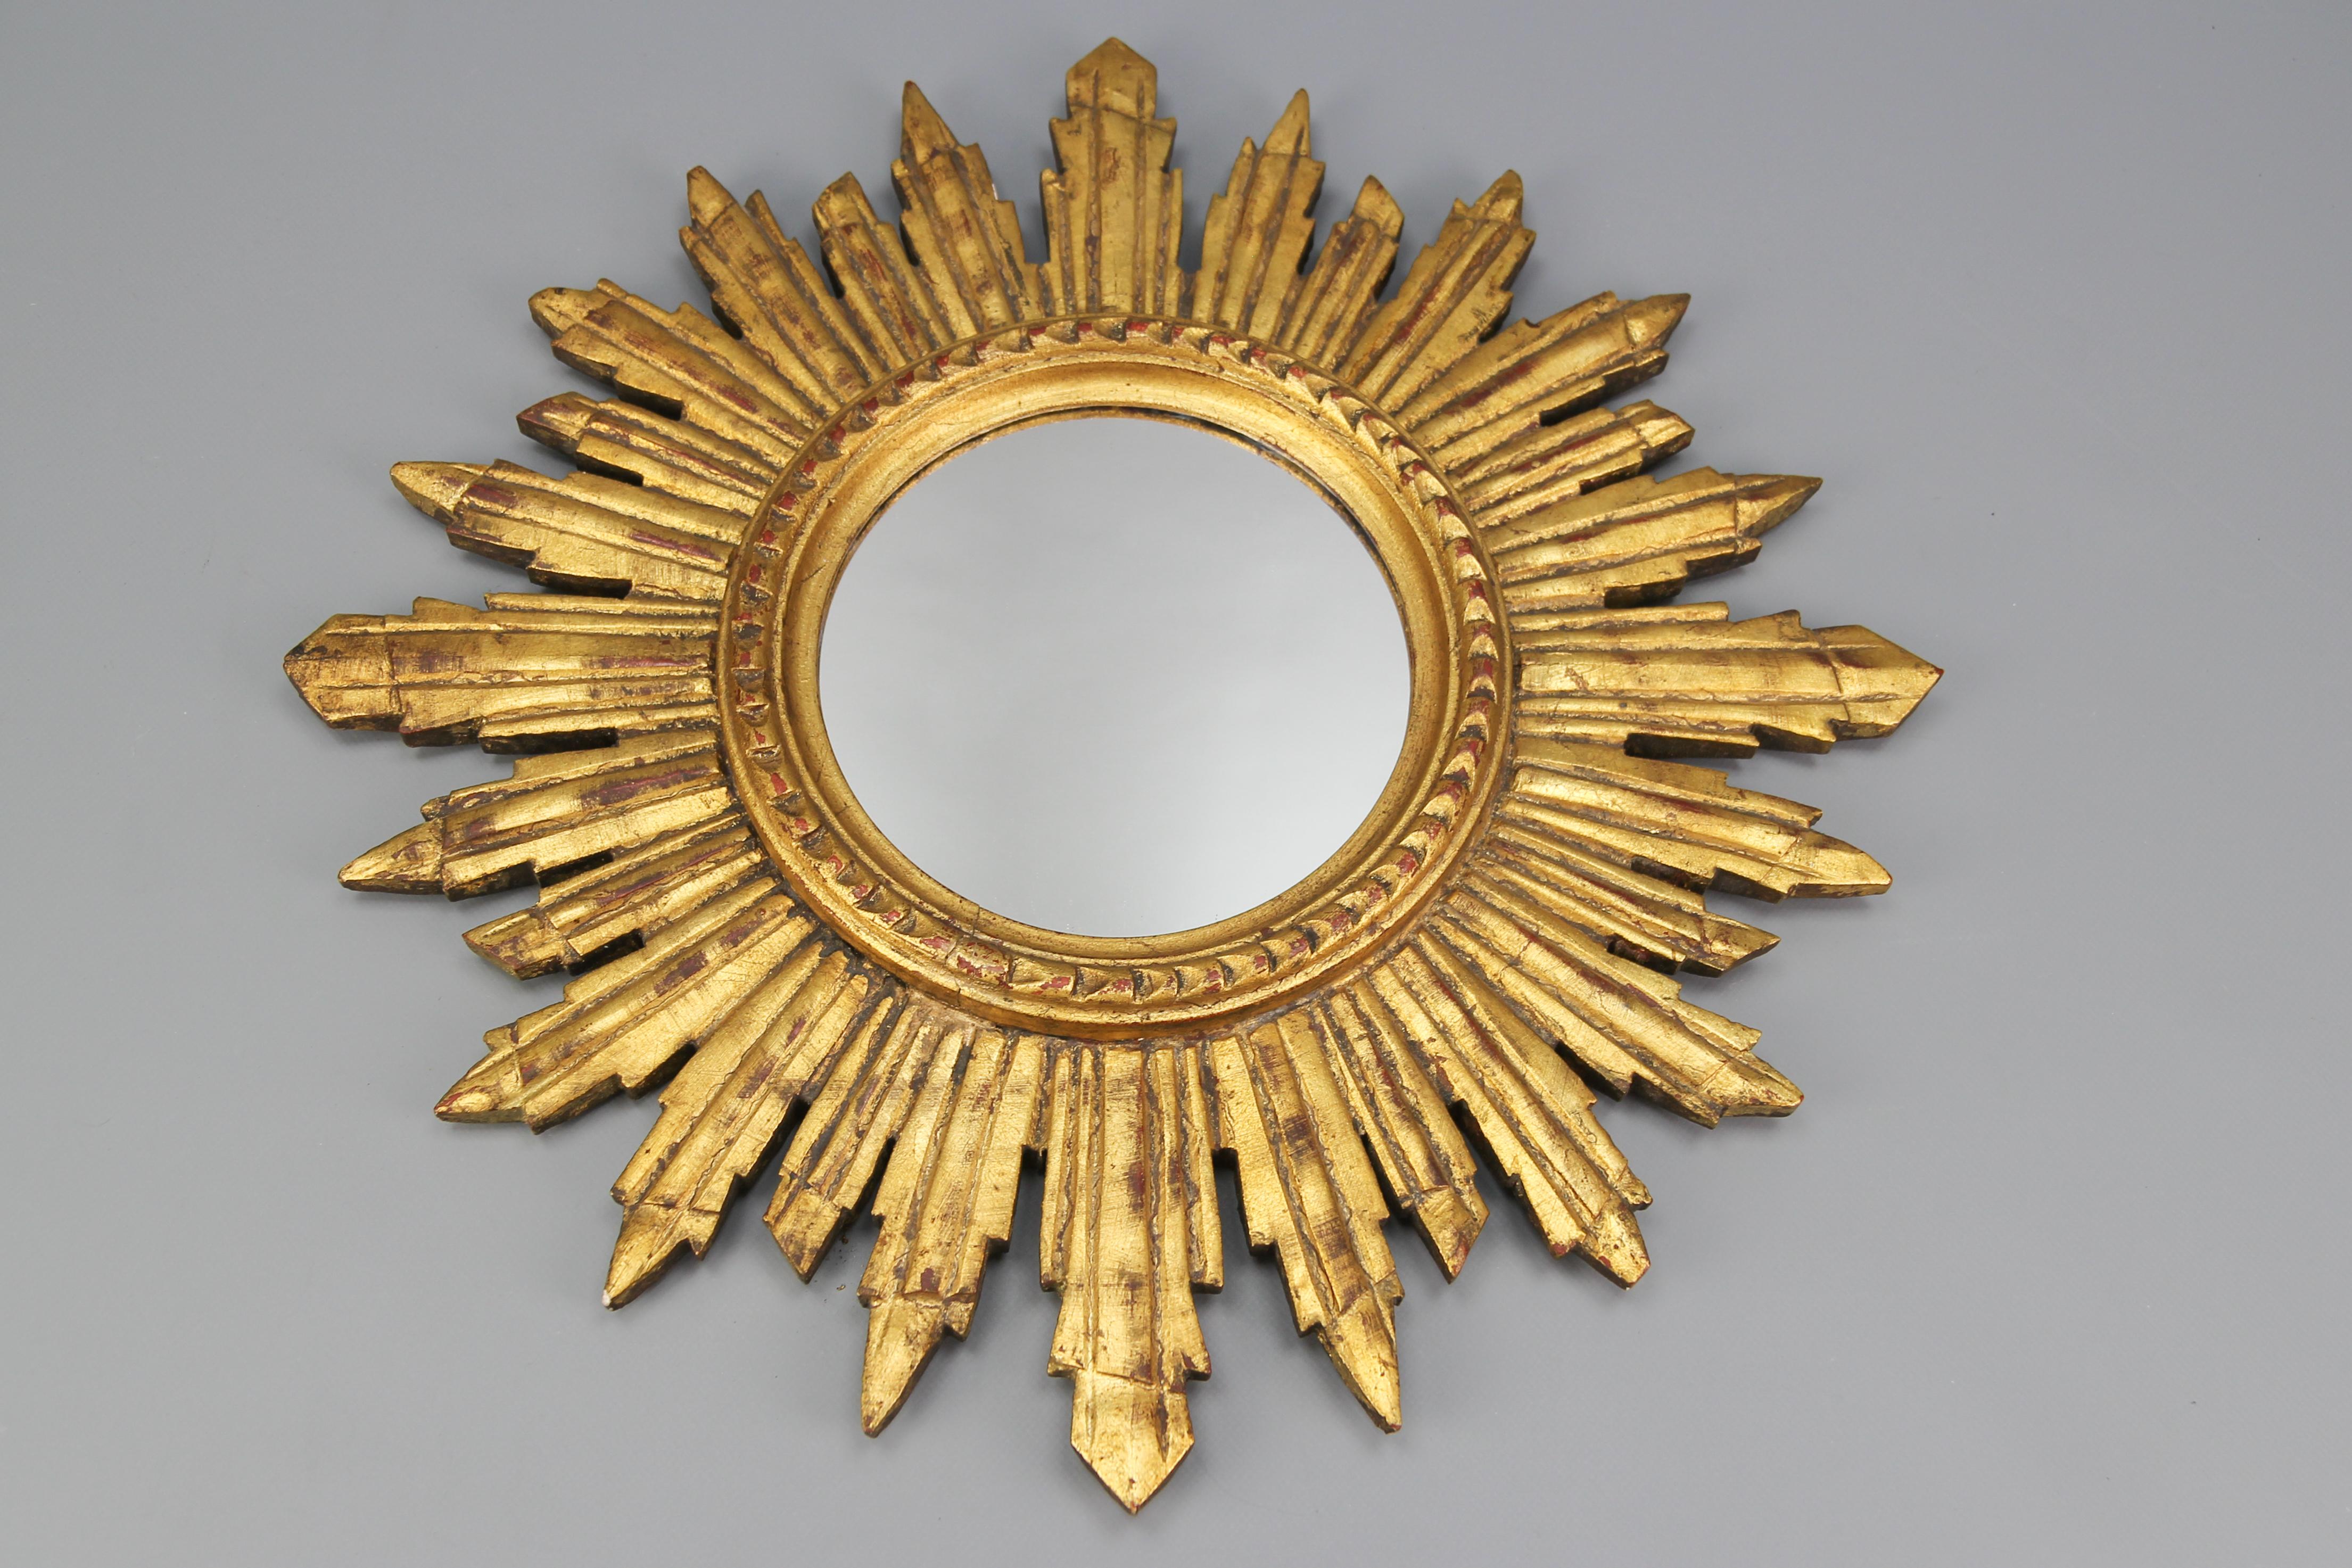 Mid-century Gilt wood sunburst or sun mirror, Italy, from the 1960s.
A beautiful Hollywood Regency-style round sun or sunburst mirror with a gold-plated pine wood frame.
Dimensions: height: 4 cm / 1.57 in; diameter: 50 cm / 19.7 in.
In good